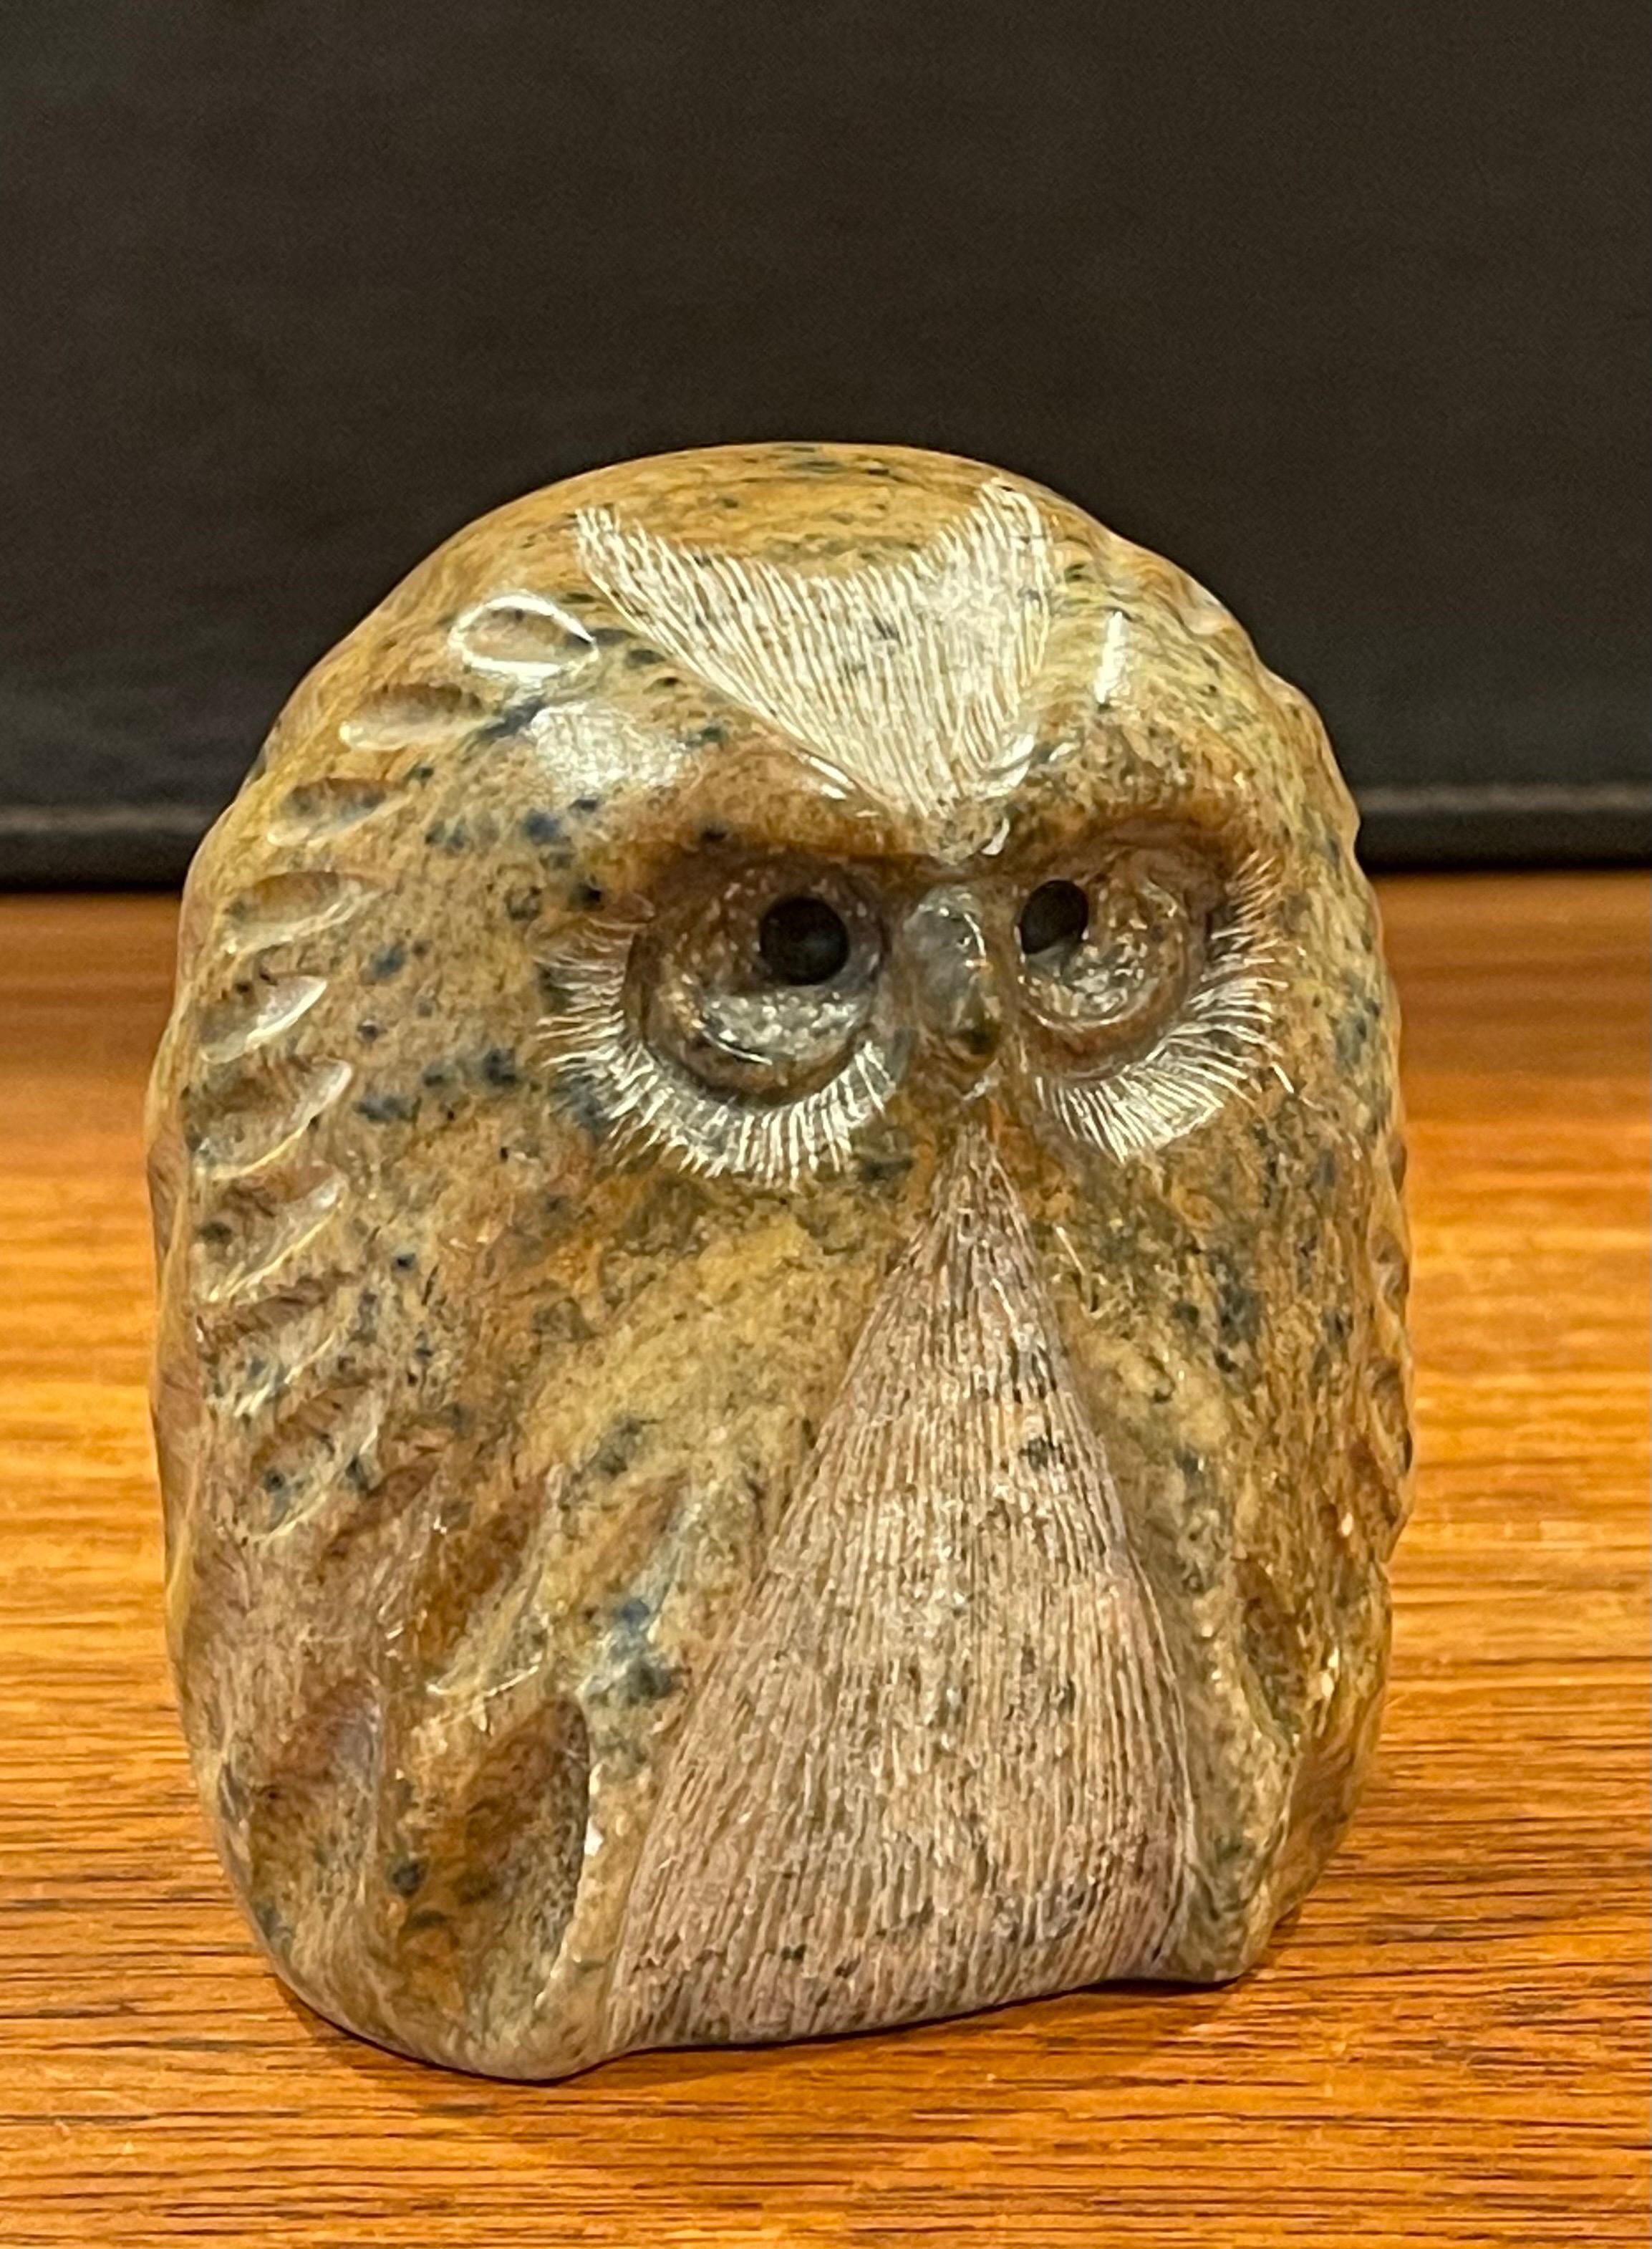 Brutalist style carved soapstone owl sculpture by Glenn Heath, circa 1991. The owl is in very good vintage condition with no chips or cracks and measures 3